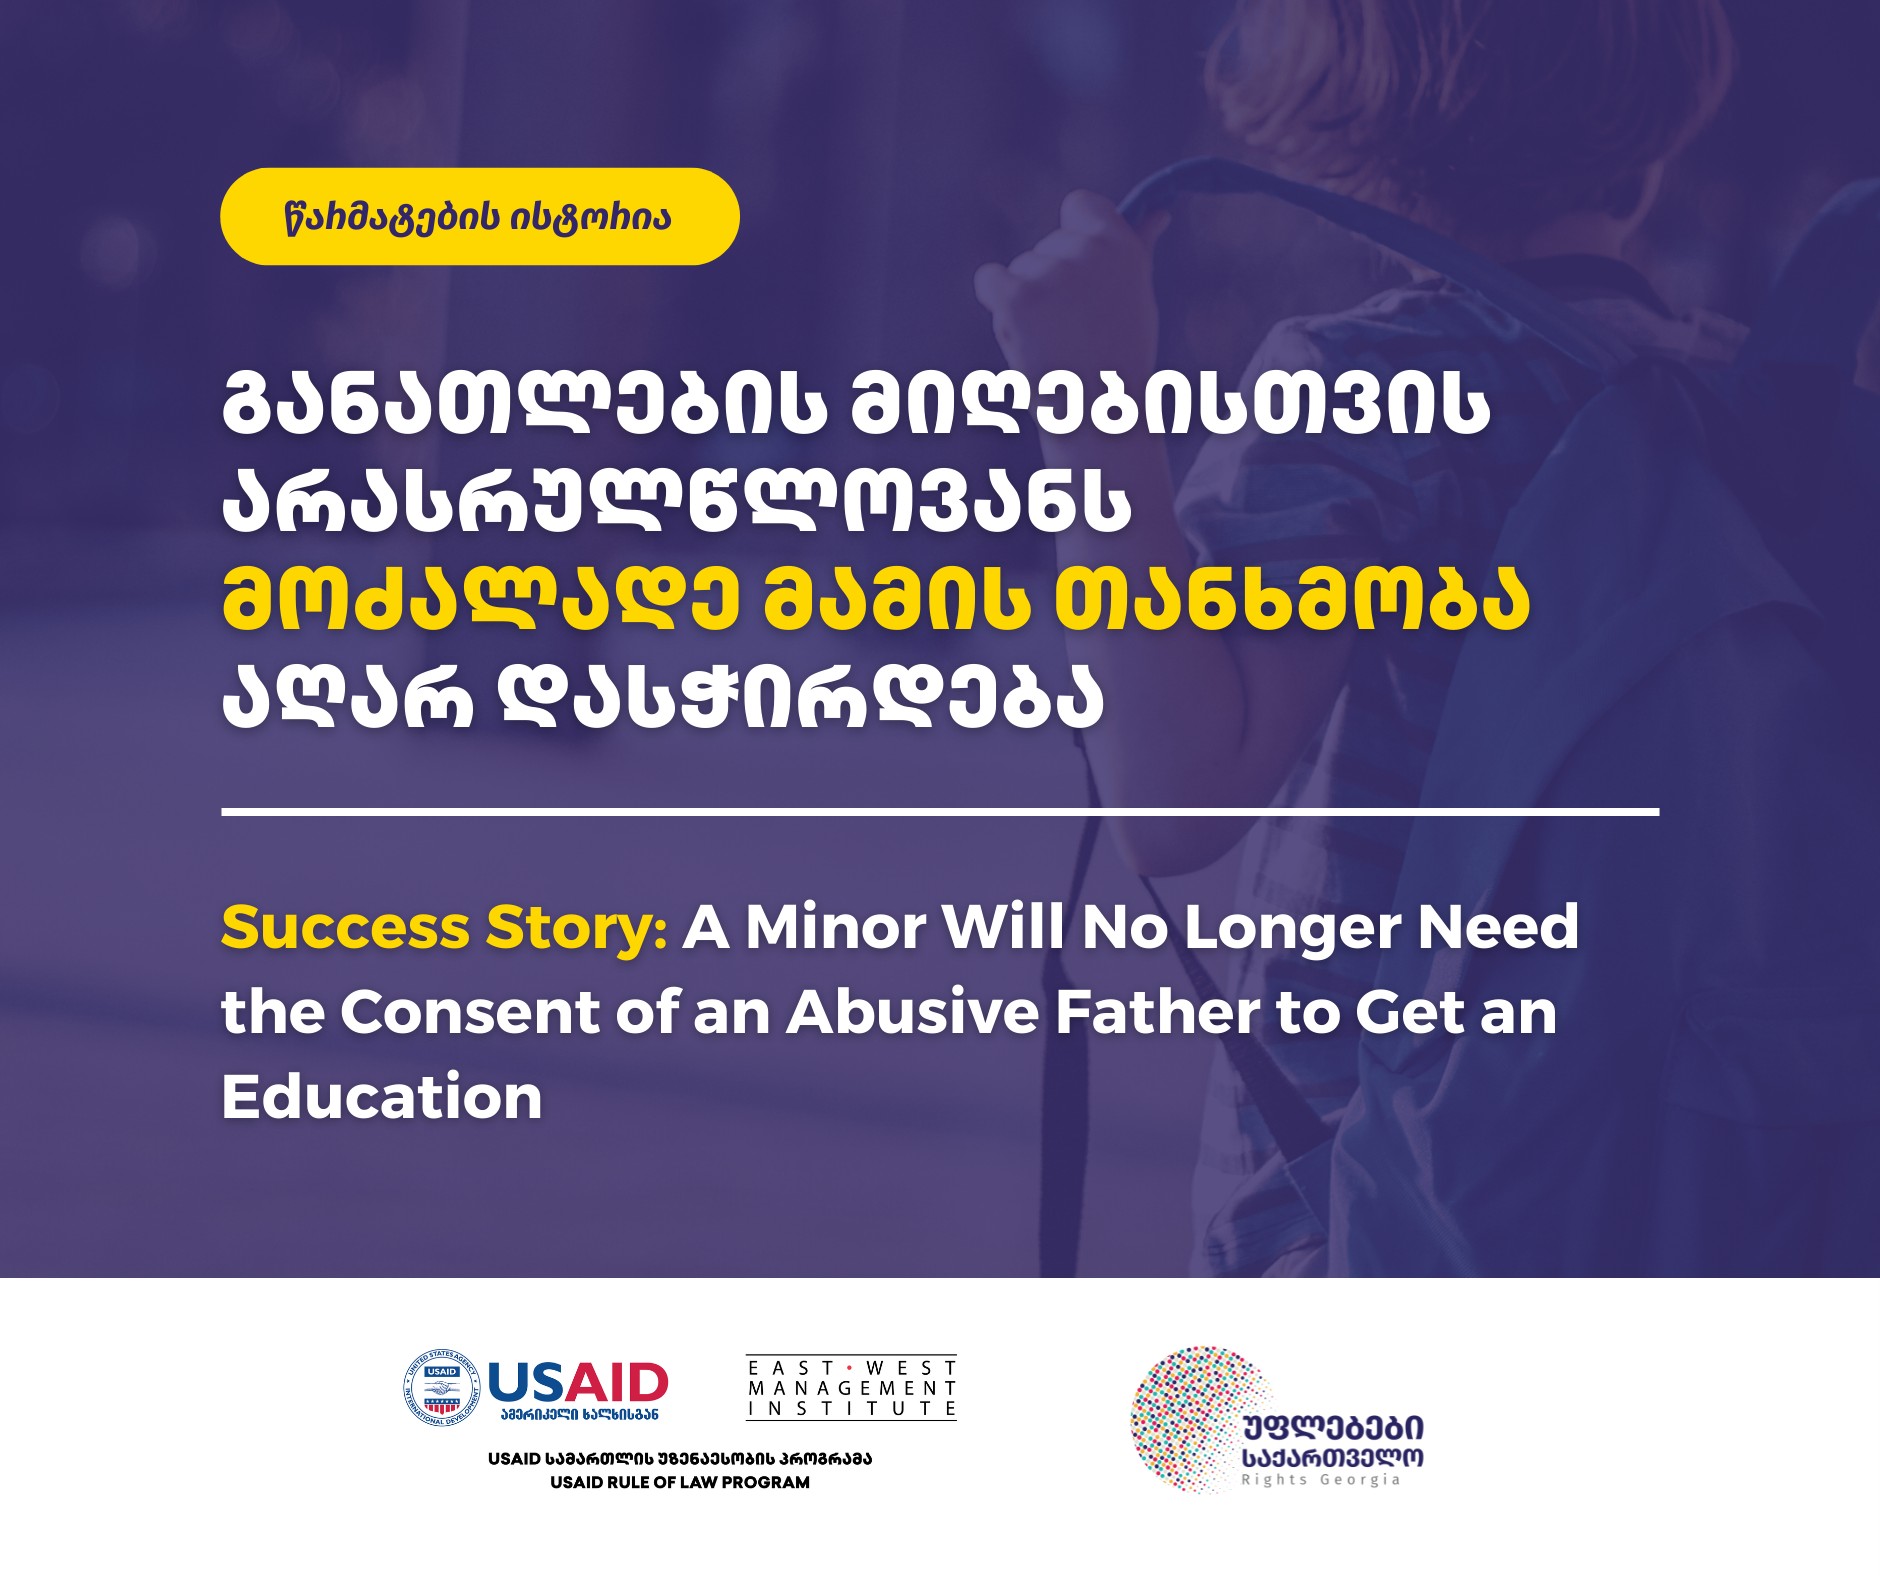 A minor will no longer need the consent of an abusive father to get an education